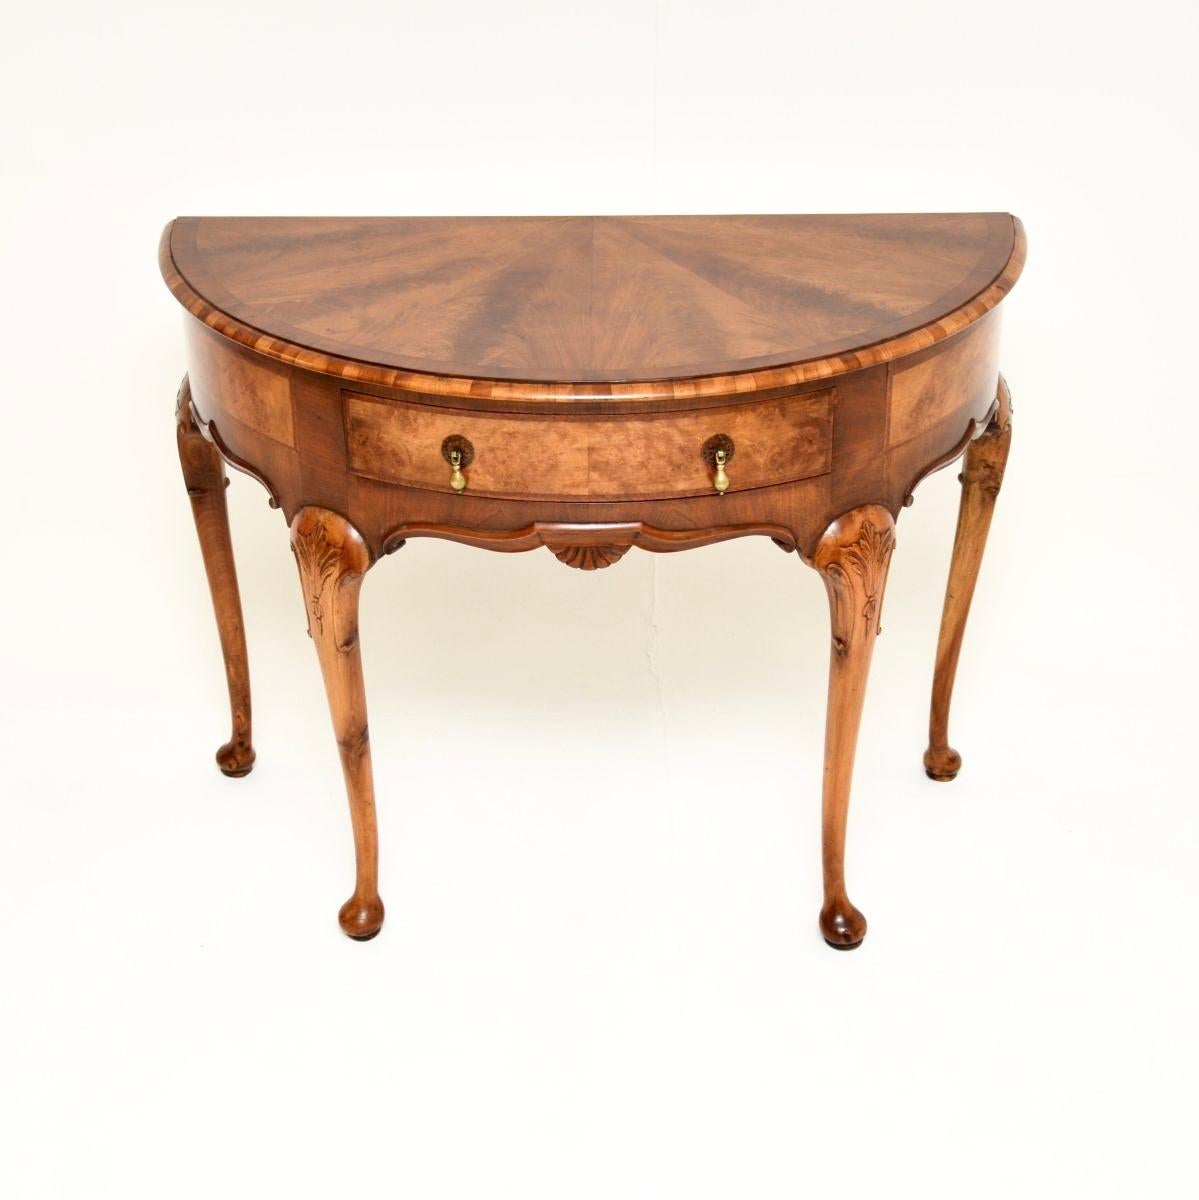 An outstanding antique walnut console table by Hamptons of Pall Mall. This was made in London in the 1890-1900 period.

It is of absolutely superb quality, and has a gorgeous design. The top has segmented figured walnut and cross banded edges, there